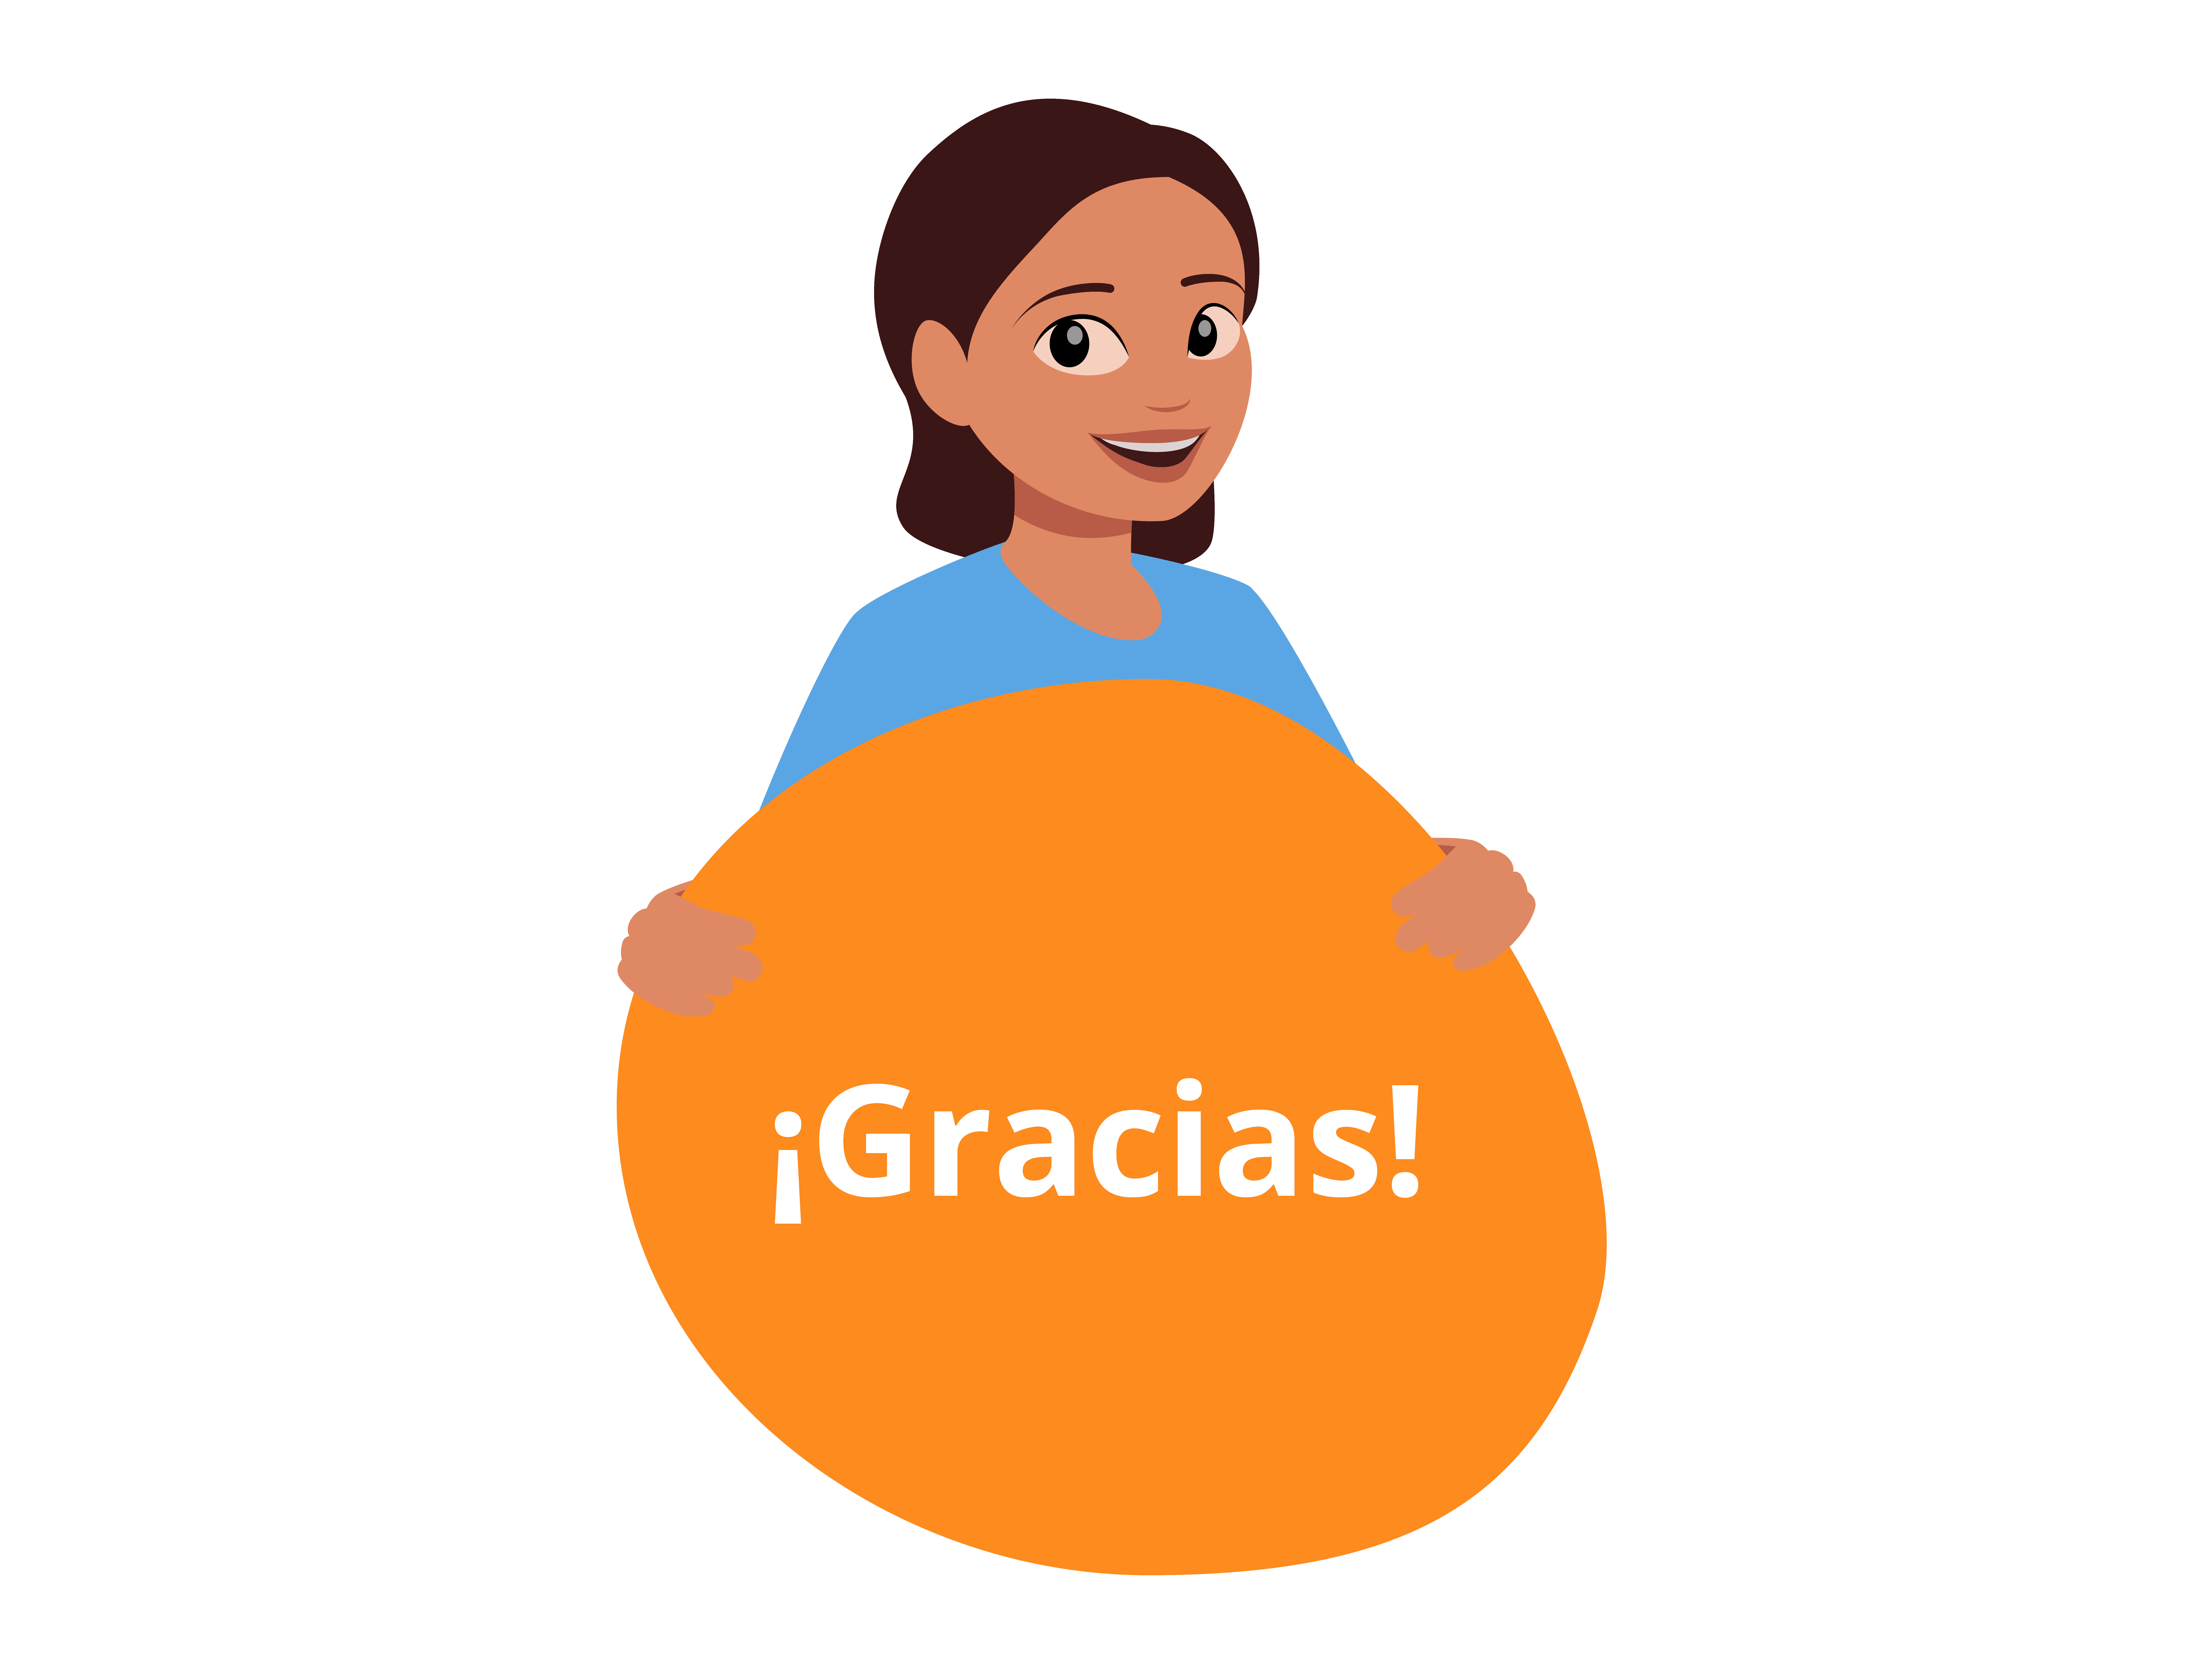 Thank you message in Spanish